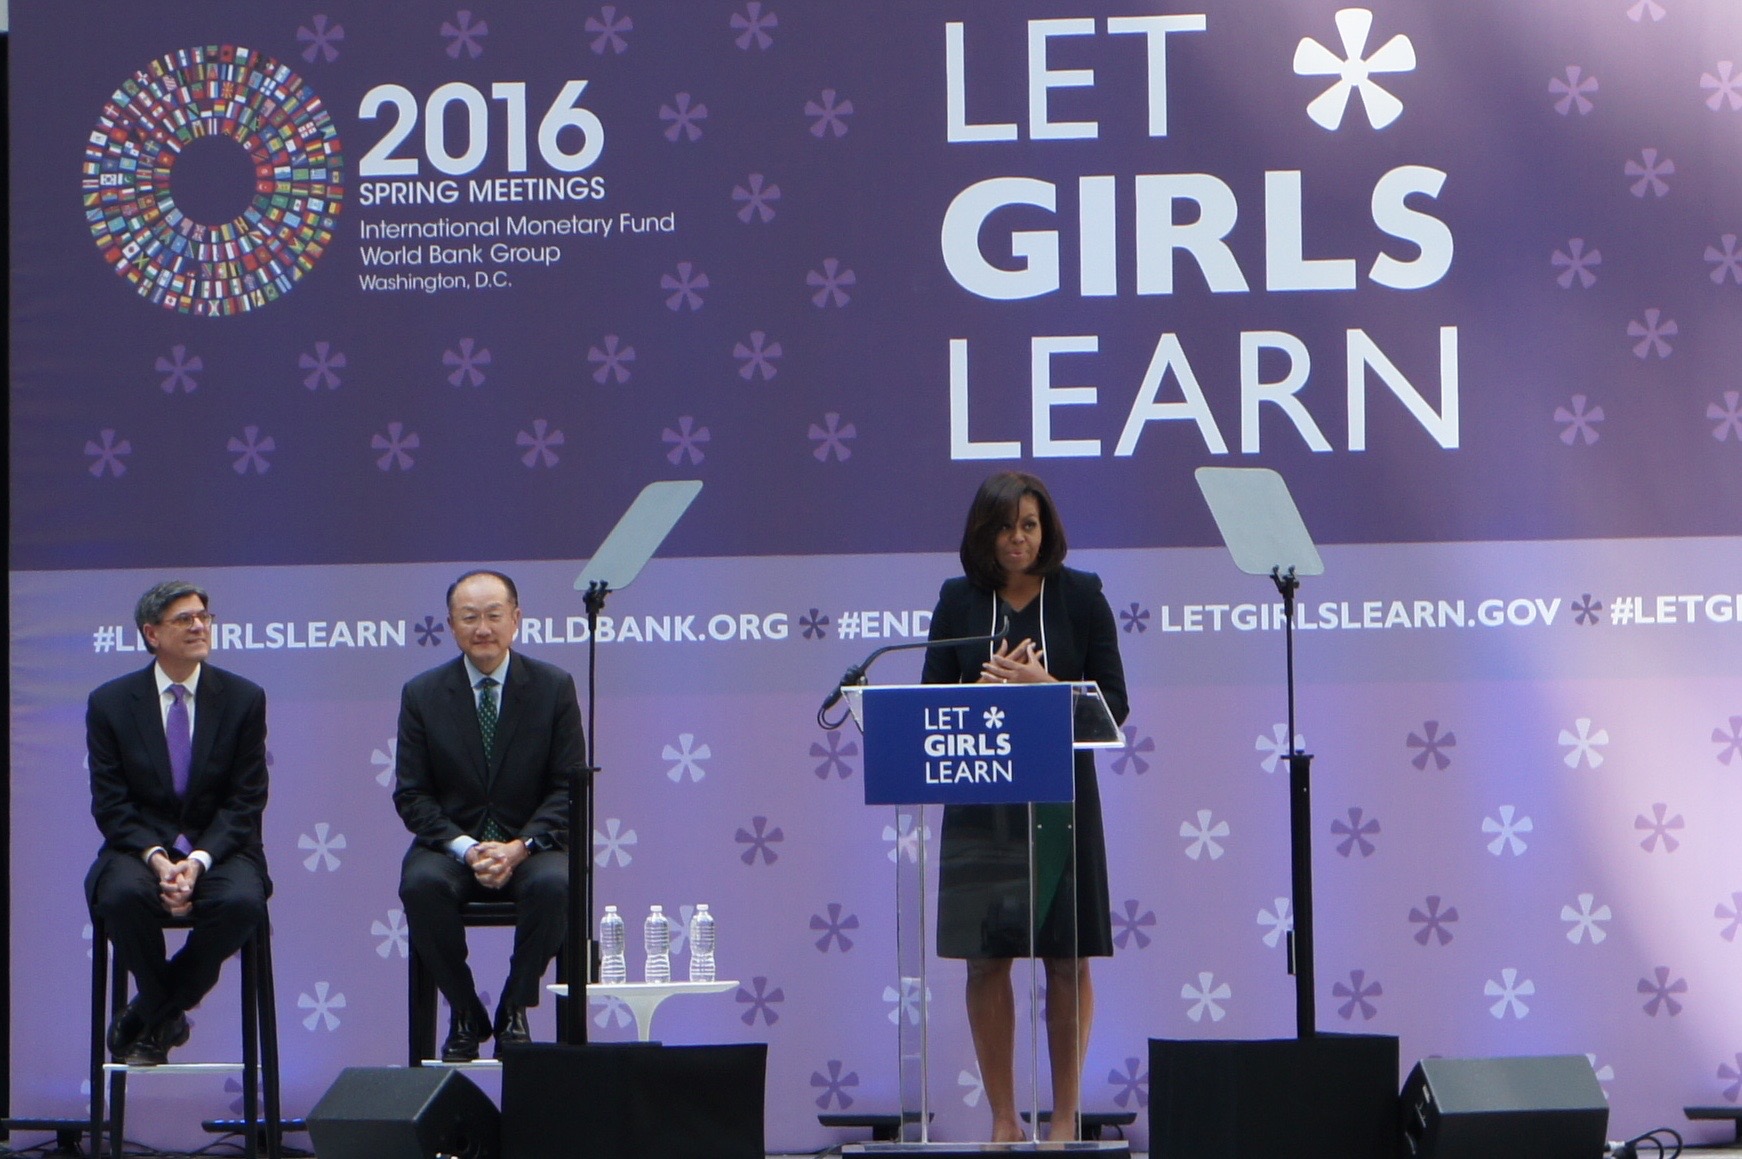 Michelle Obama joins World Bank in committing $2.5 billion to girls’ education